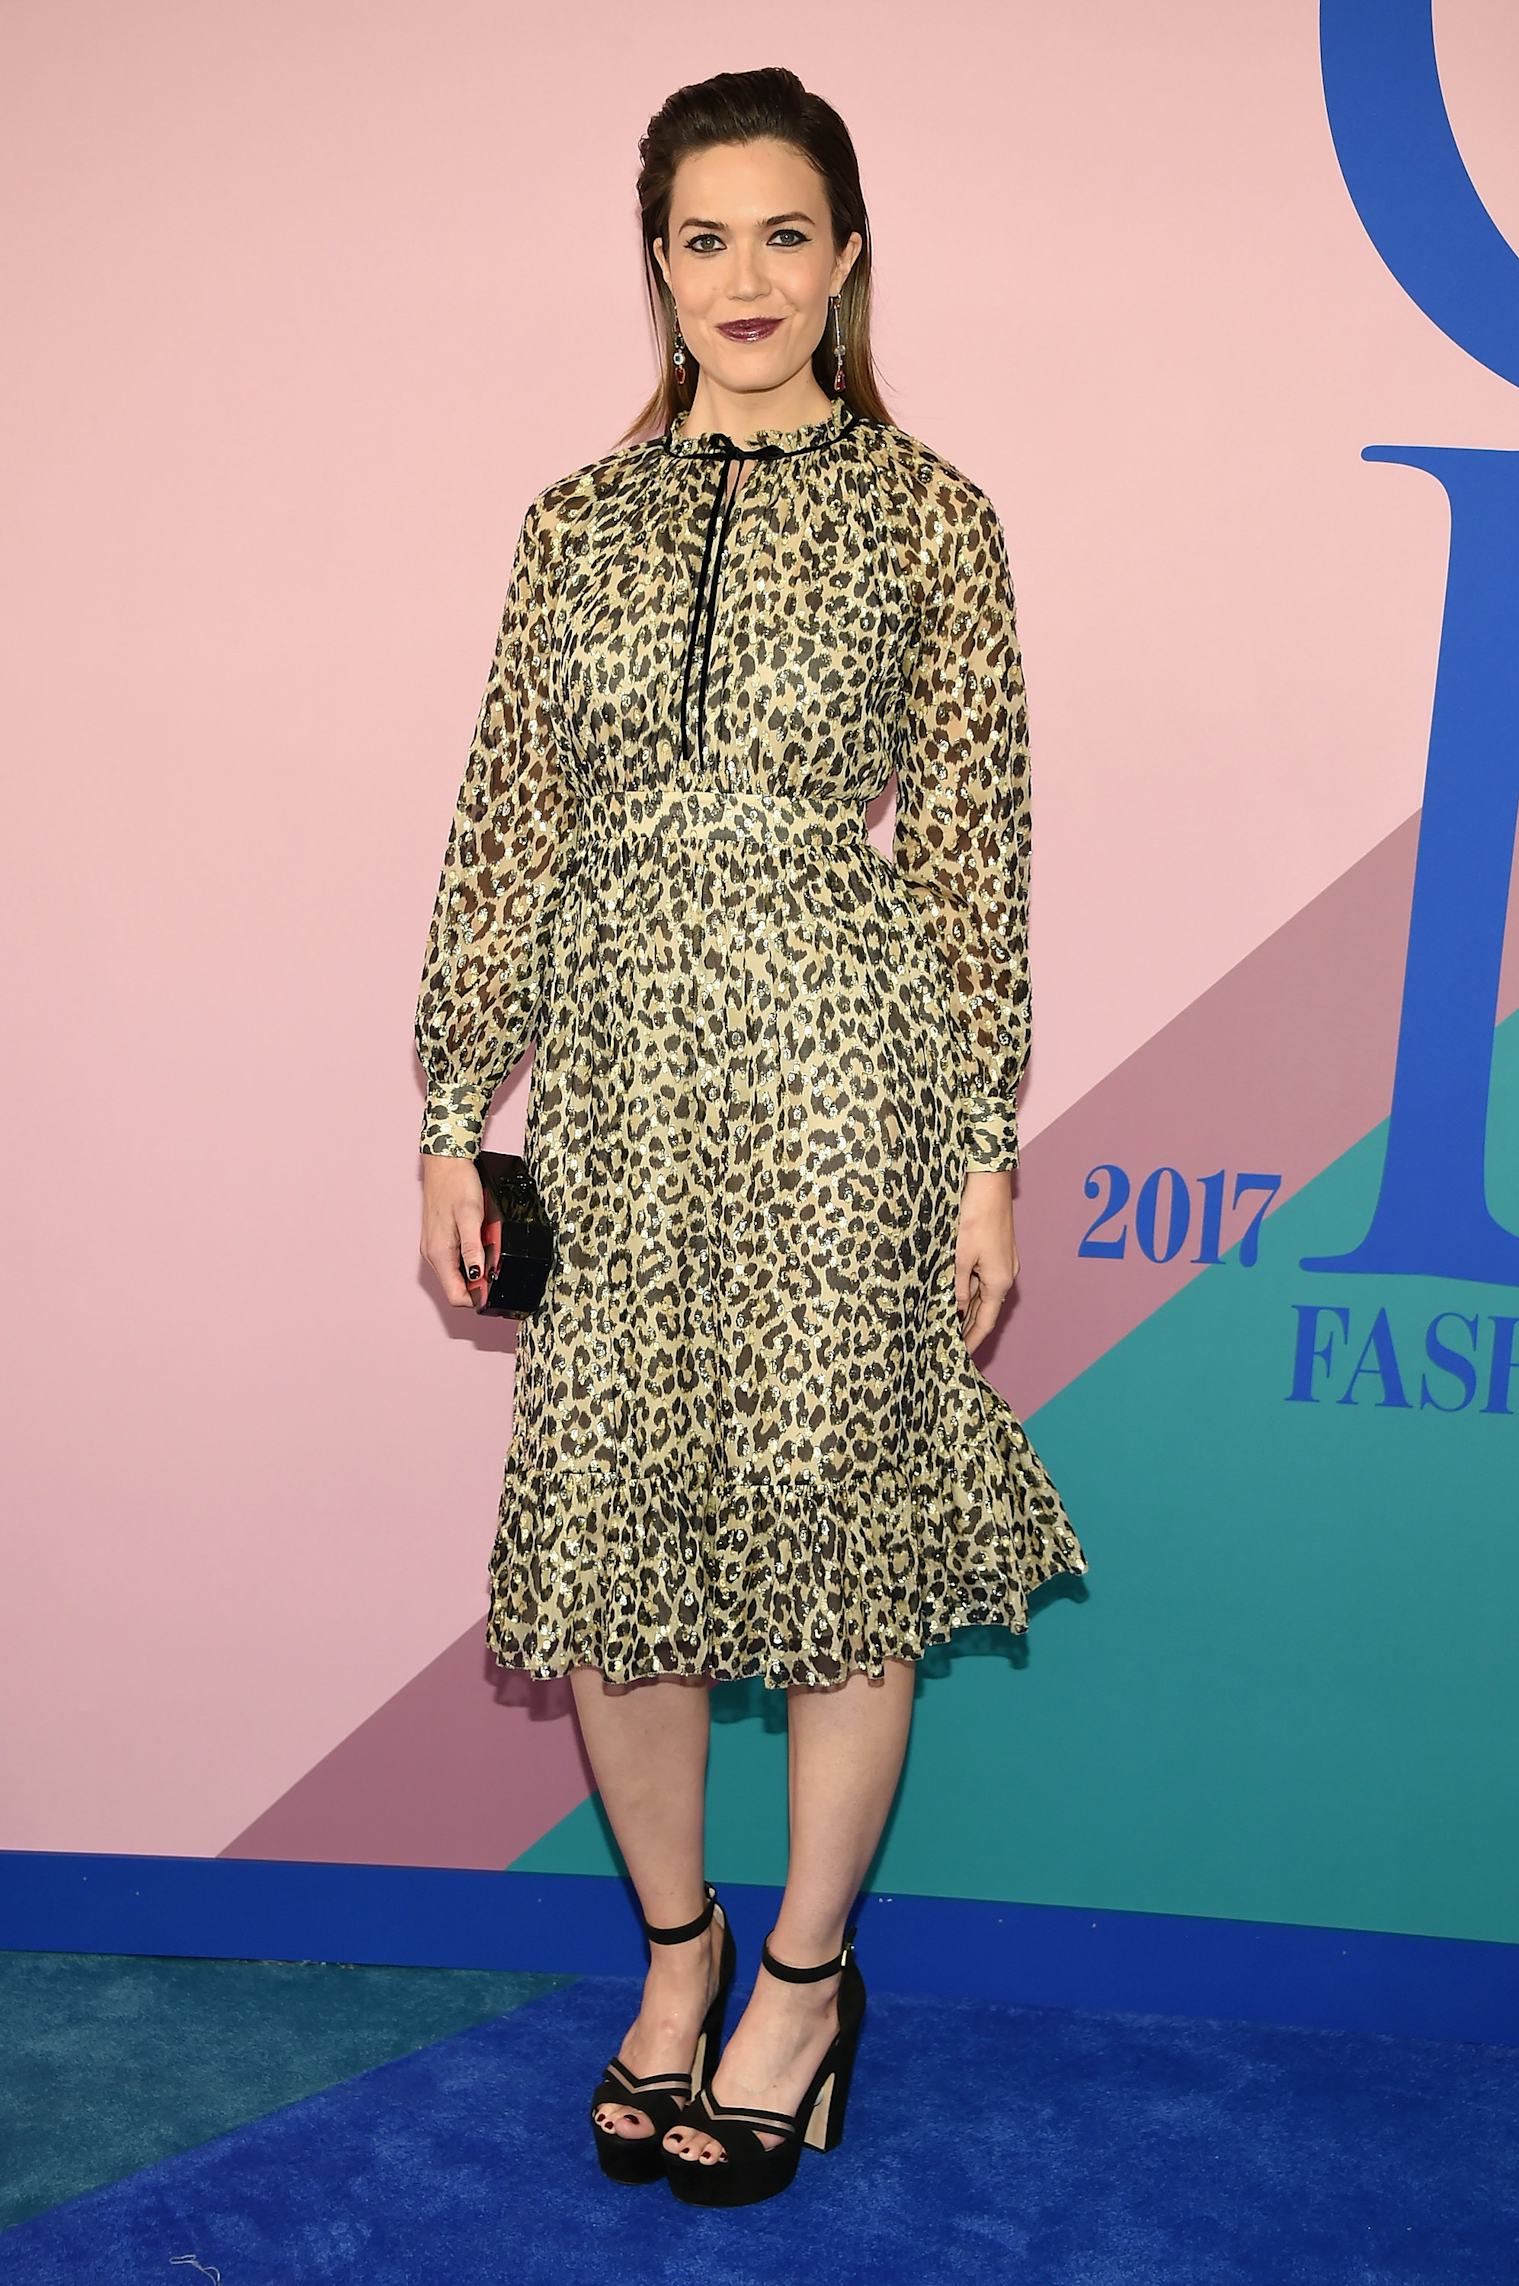 All The Looks From The 2017 CFDA Fashion Awards Are As Cool As You'd Expect